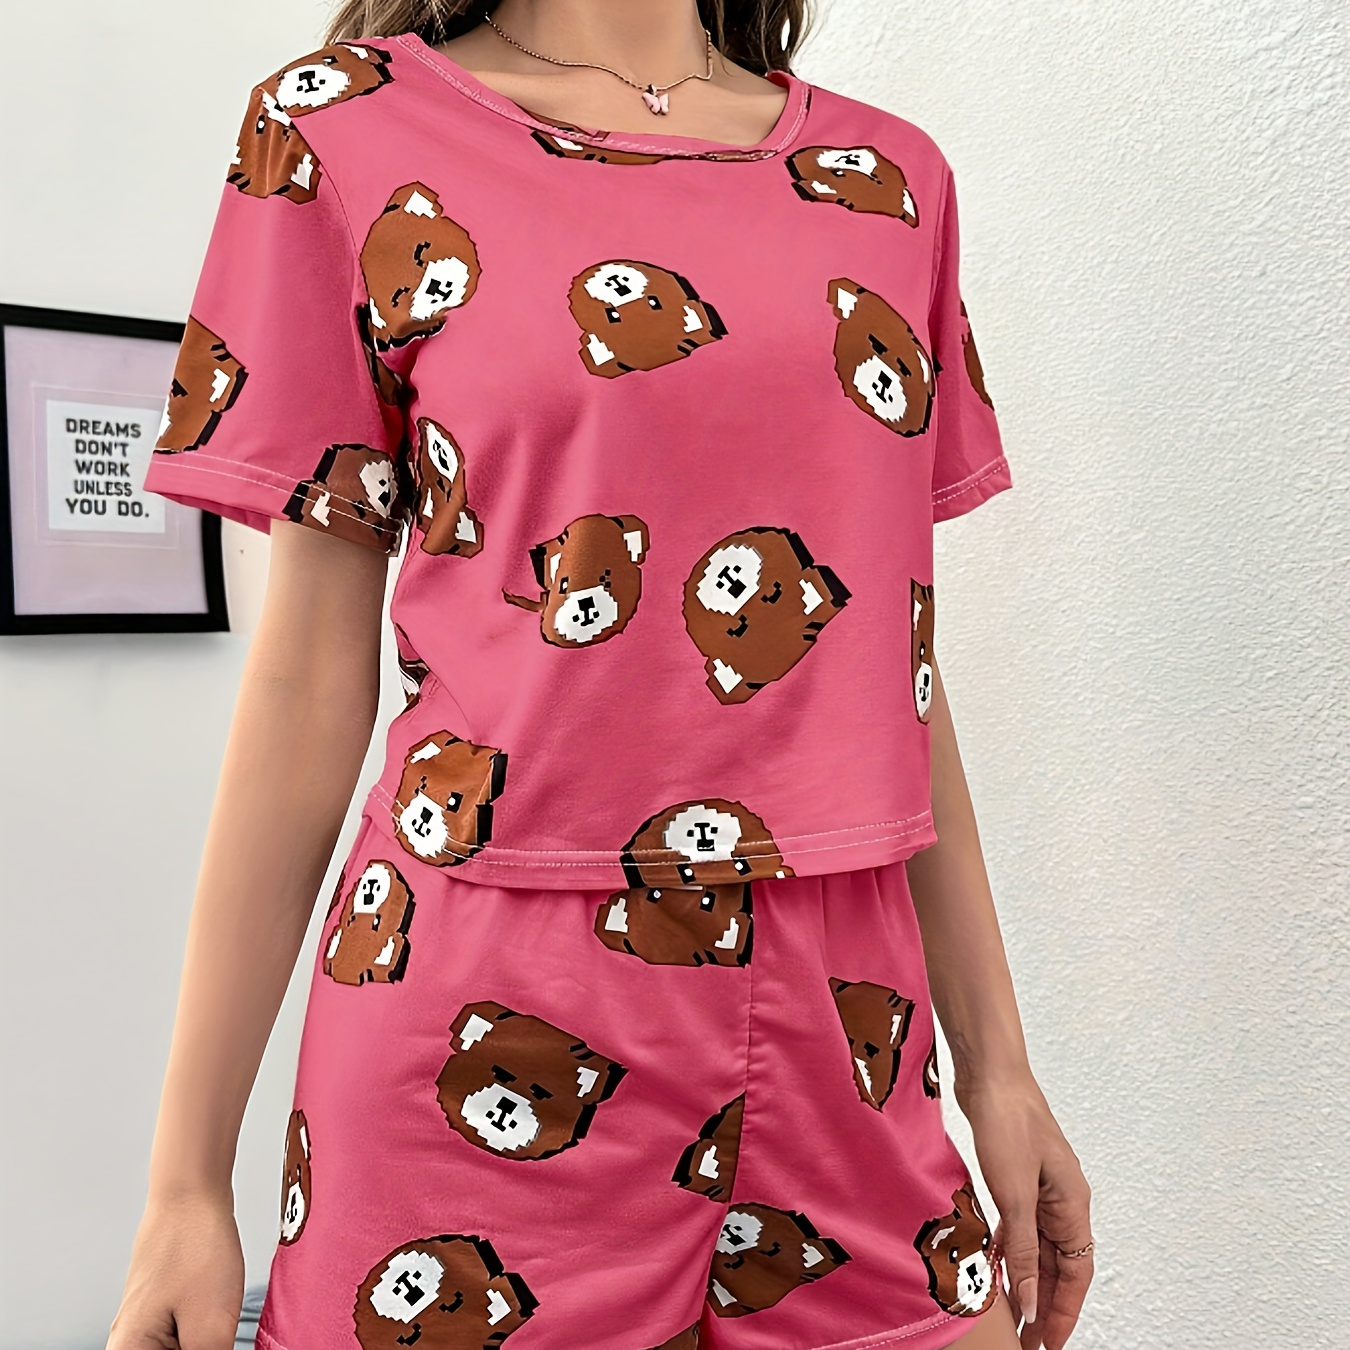 

Women's Cartoon Bear Print Casual Pajama Set, Short Sleeve Round Neck Top & Shorts, Comfortable Relaxed Fit